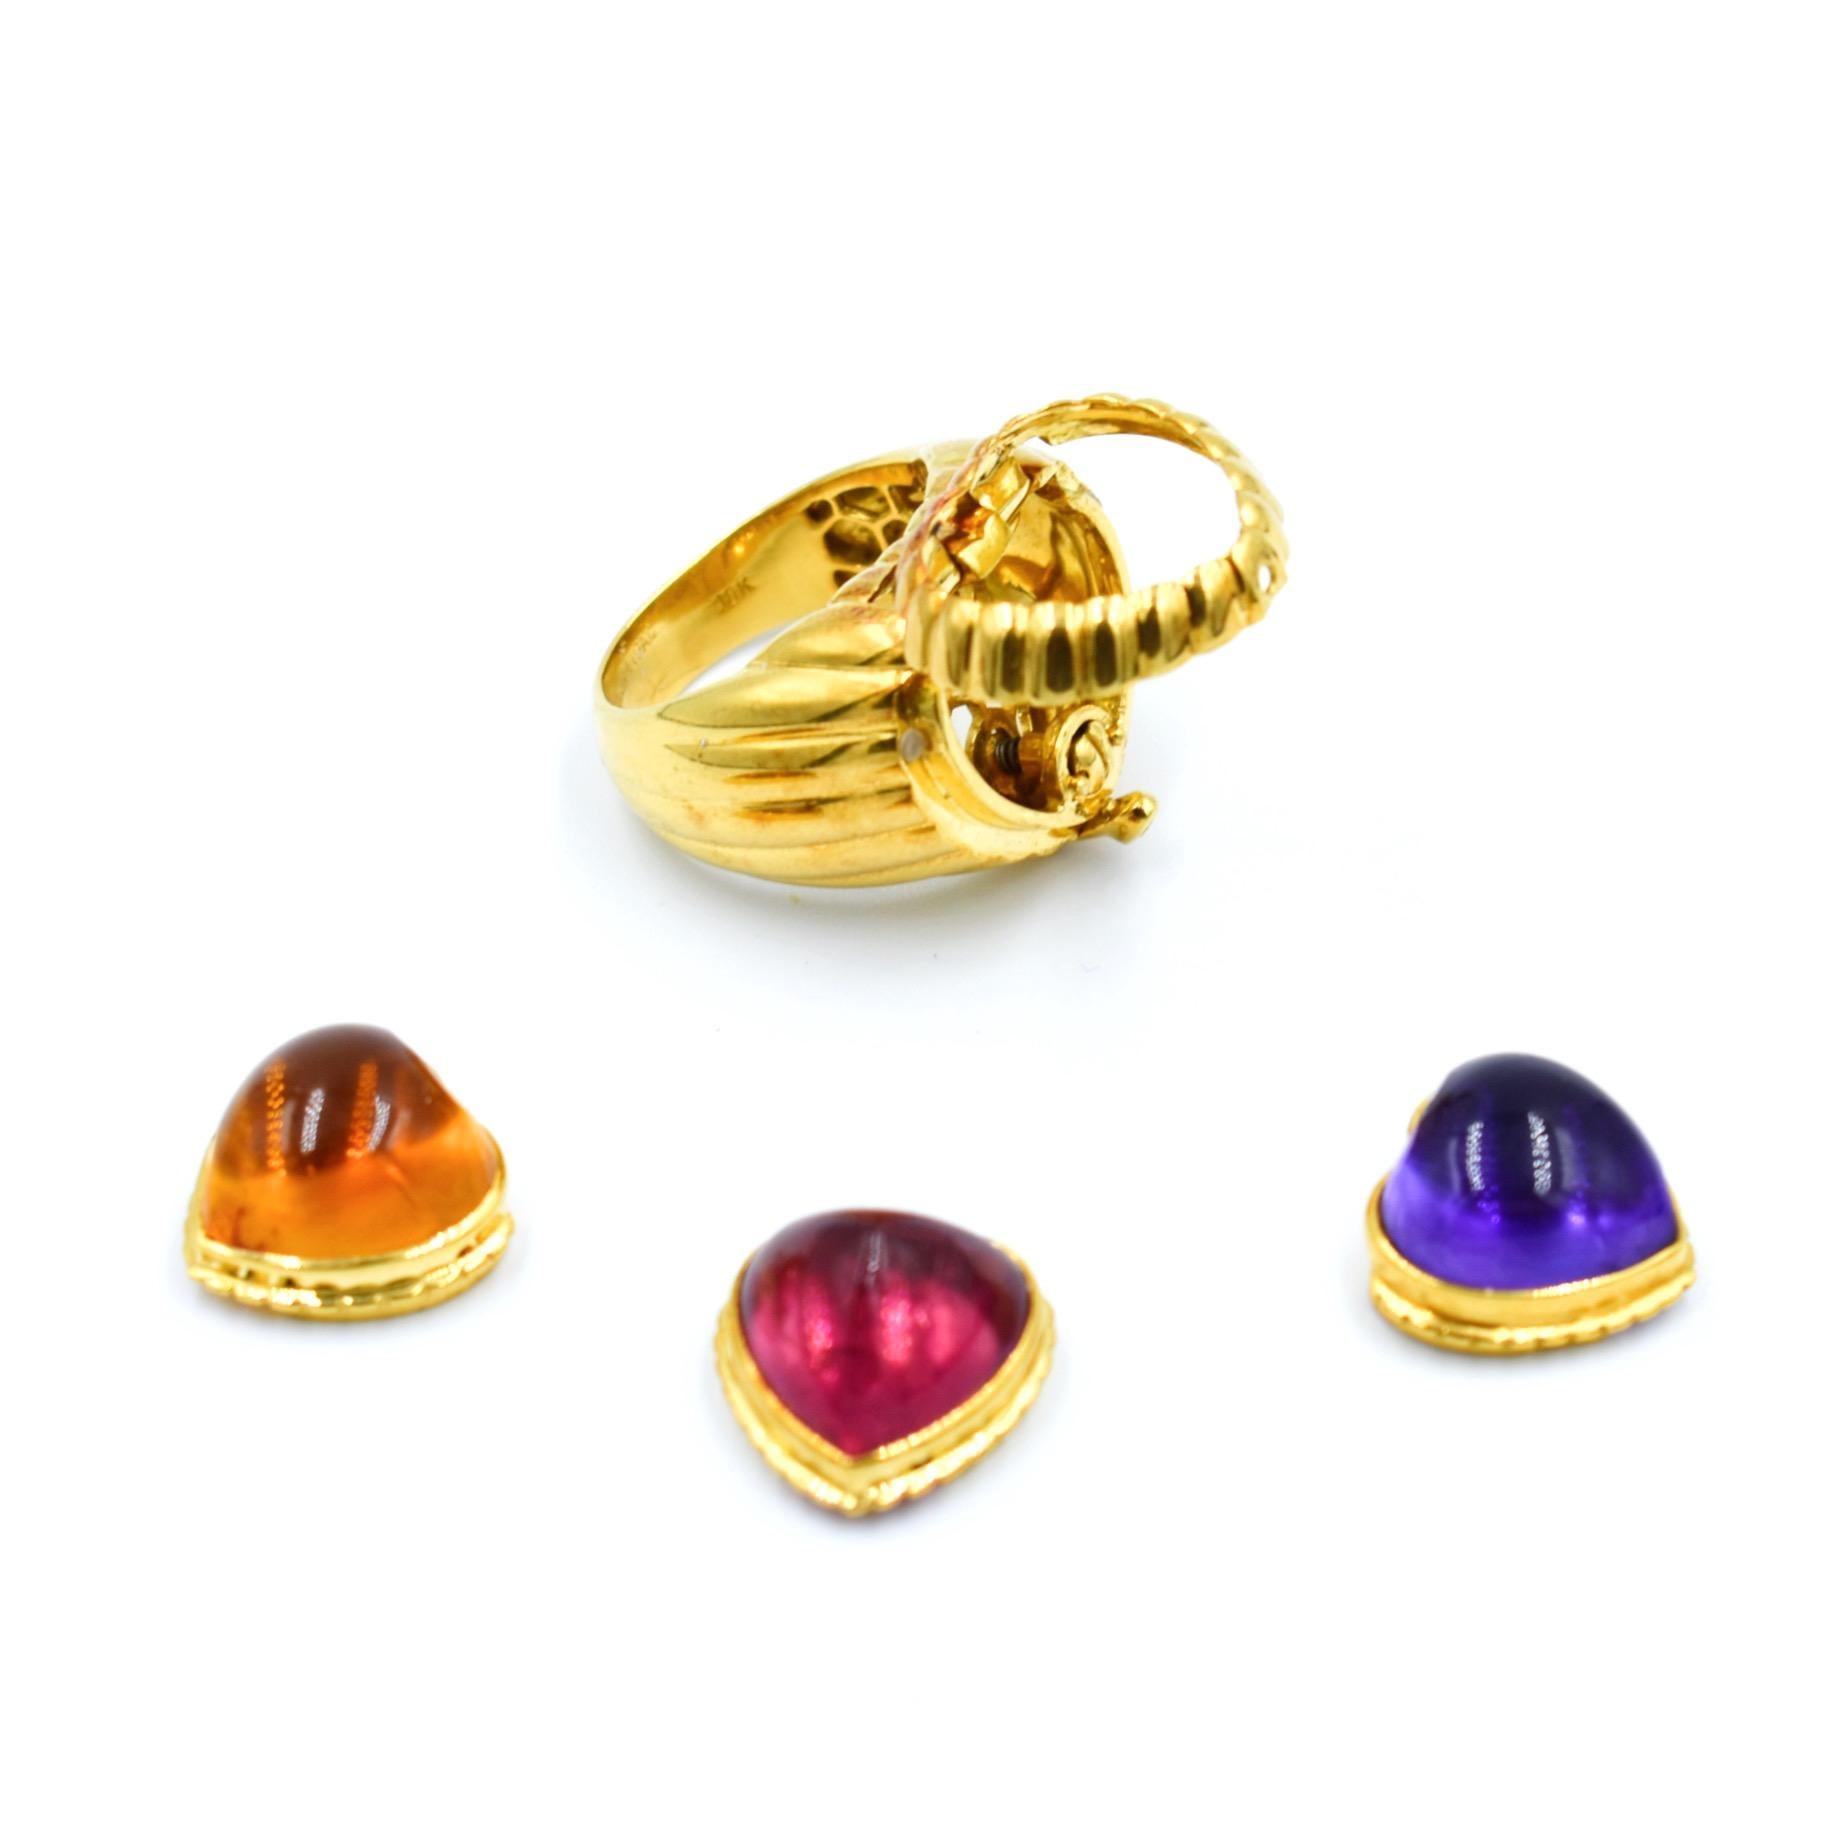 Modular 3-in-1 Heart Ring in Gold with Amethyst, Citrine, Tourmaline Cabochons For Sale 2